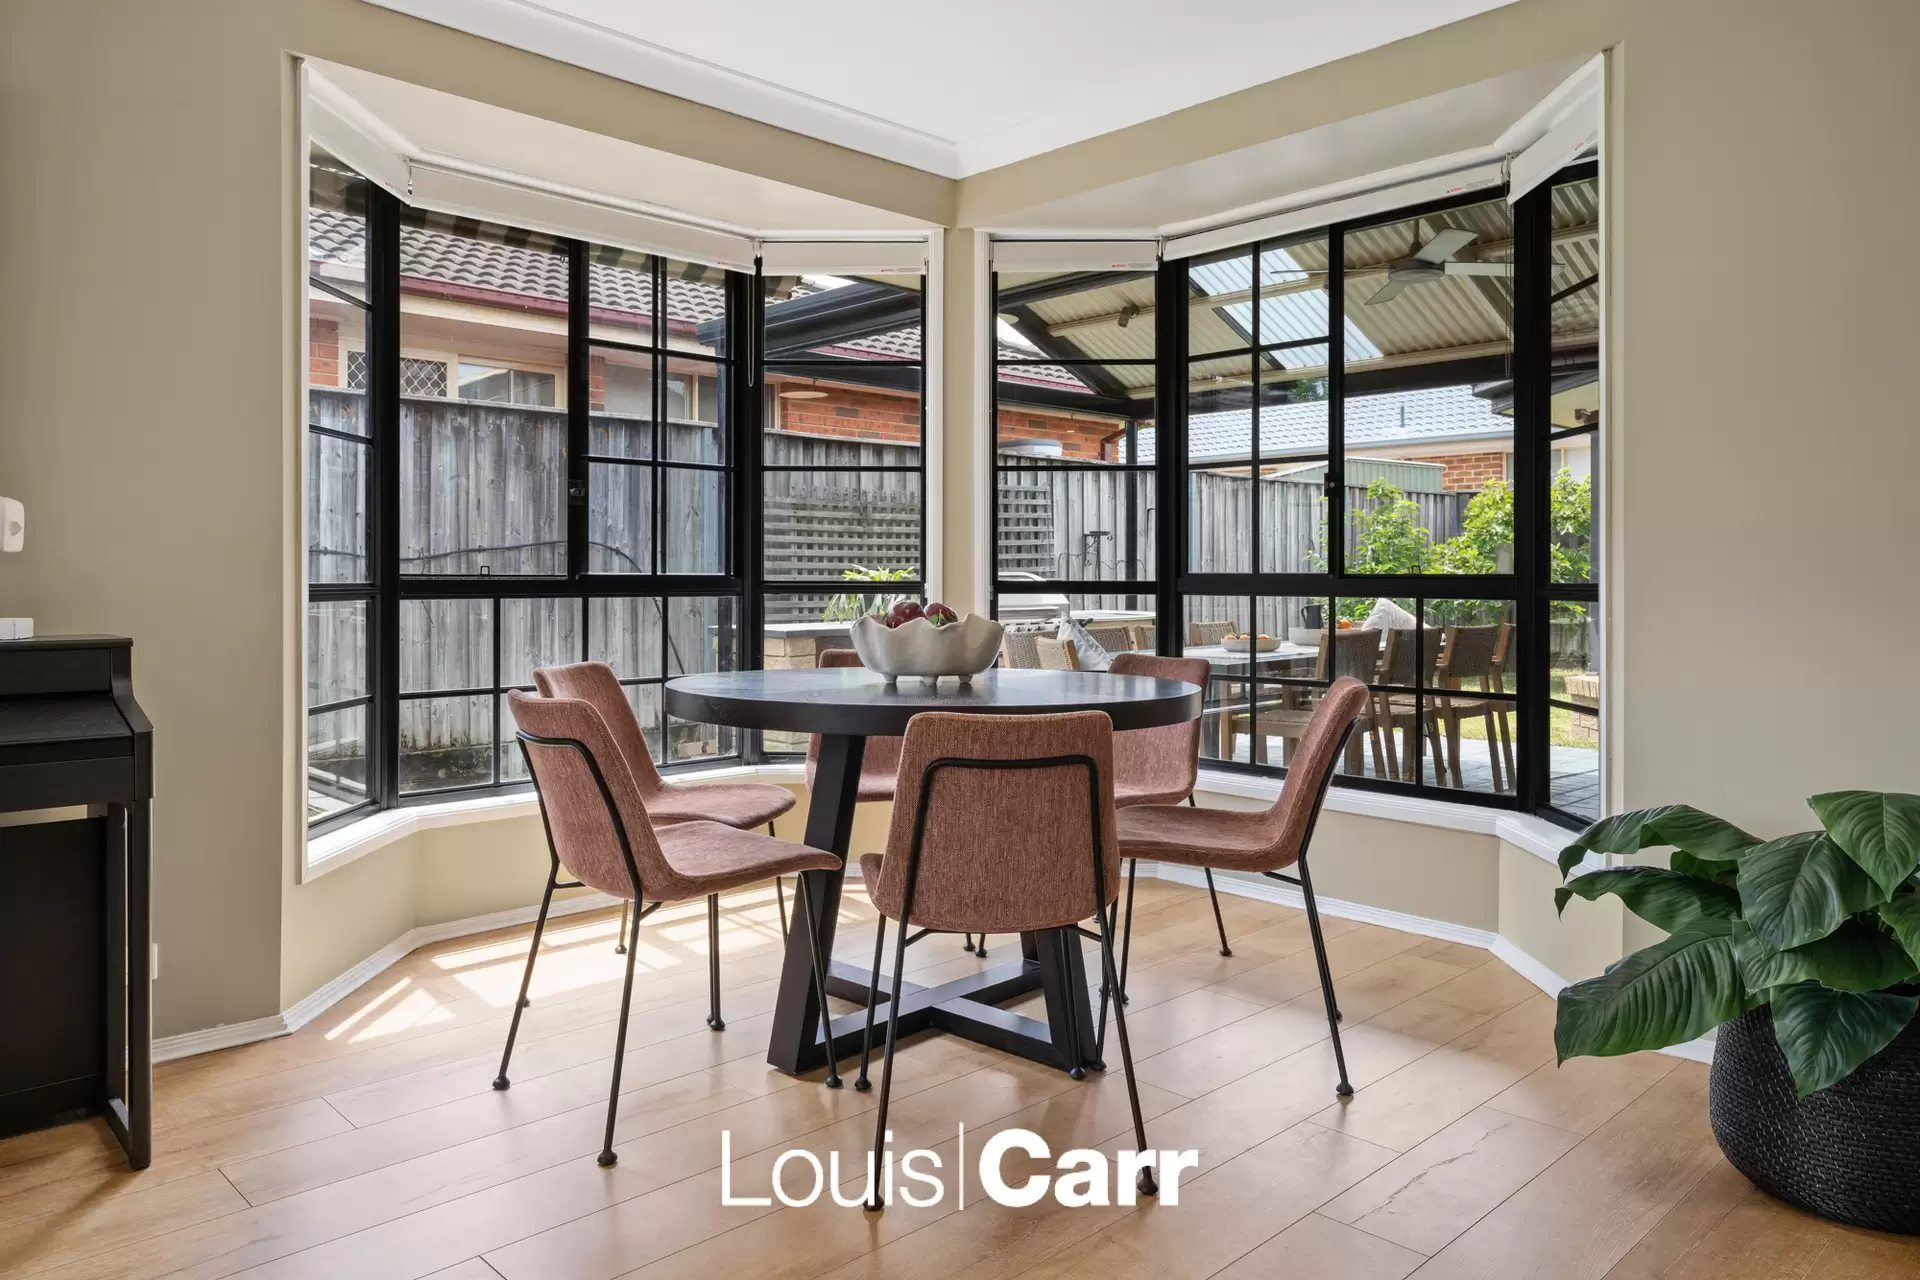 Photo #10: 33 Marsden Avenue, Kellyville - For Sale by Louis Carr Real Estate